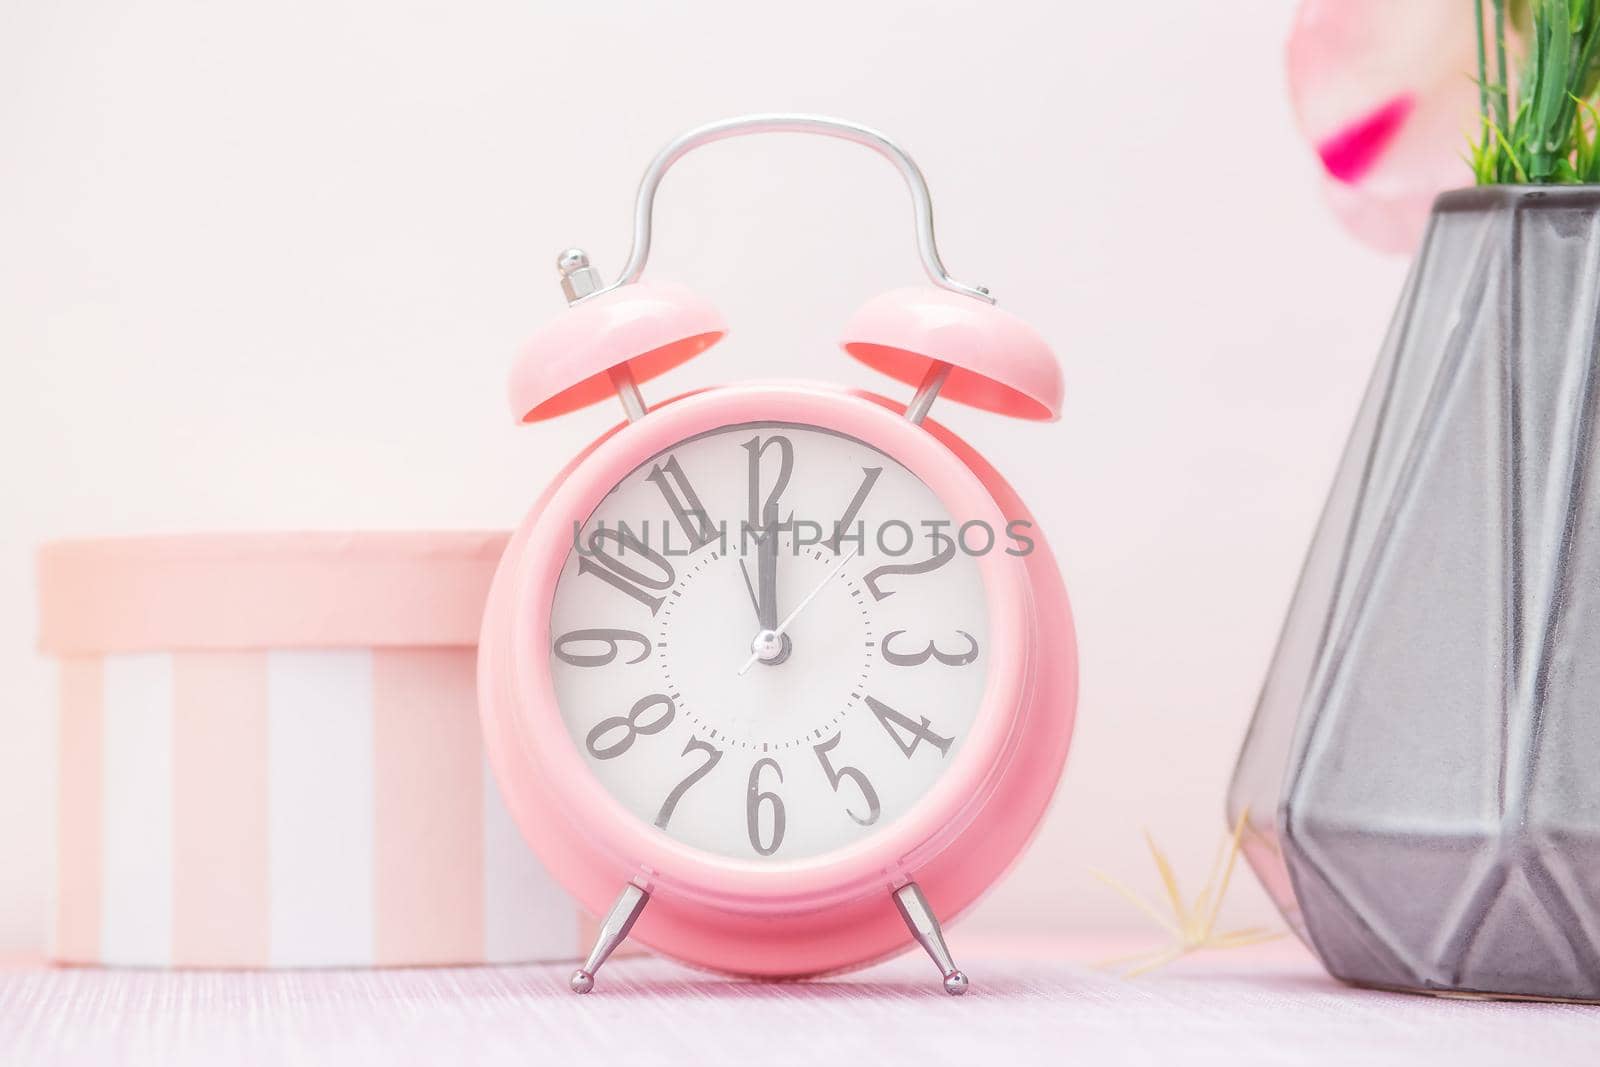 Gentle pink alarm clock next to a vase of flowers and a decorative gift box by galinasharapova